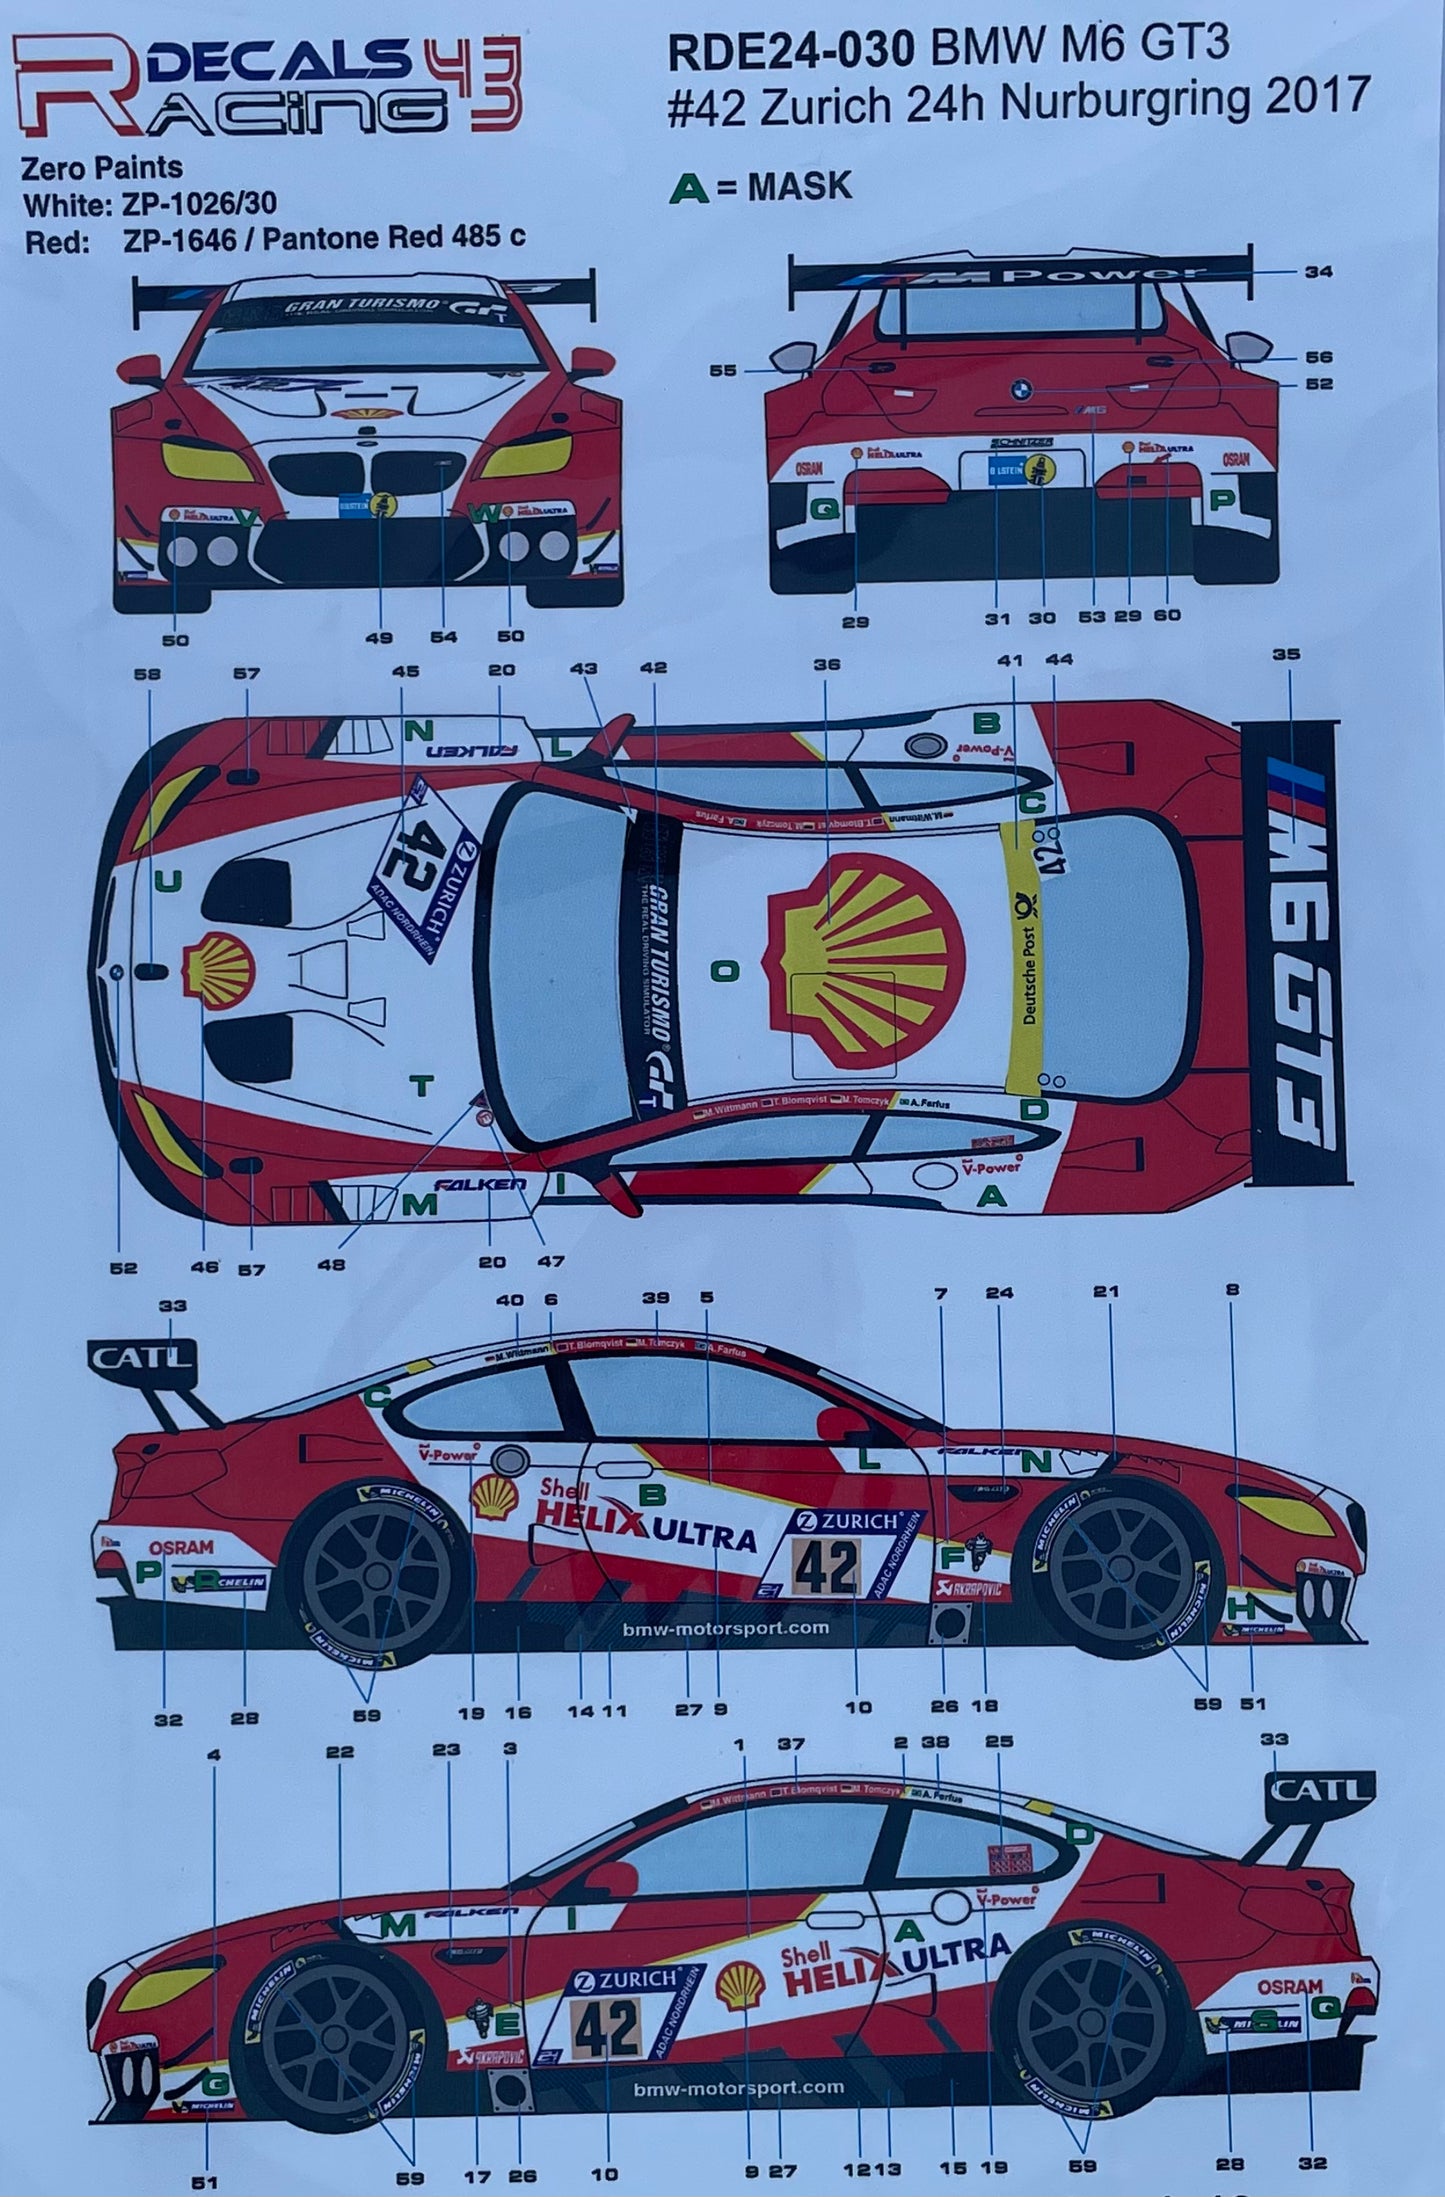 DECALS BMW M6 GT3 - SHELL 24 HOURS OF NURBURGRING 2017